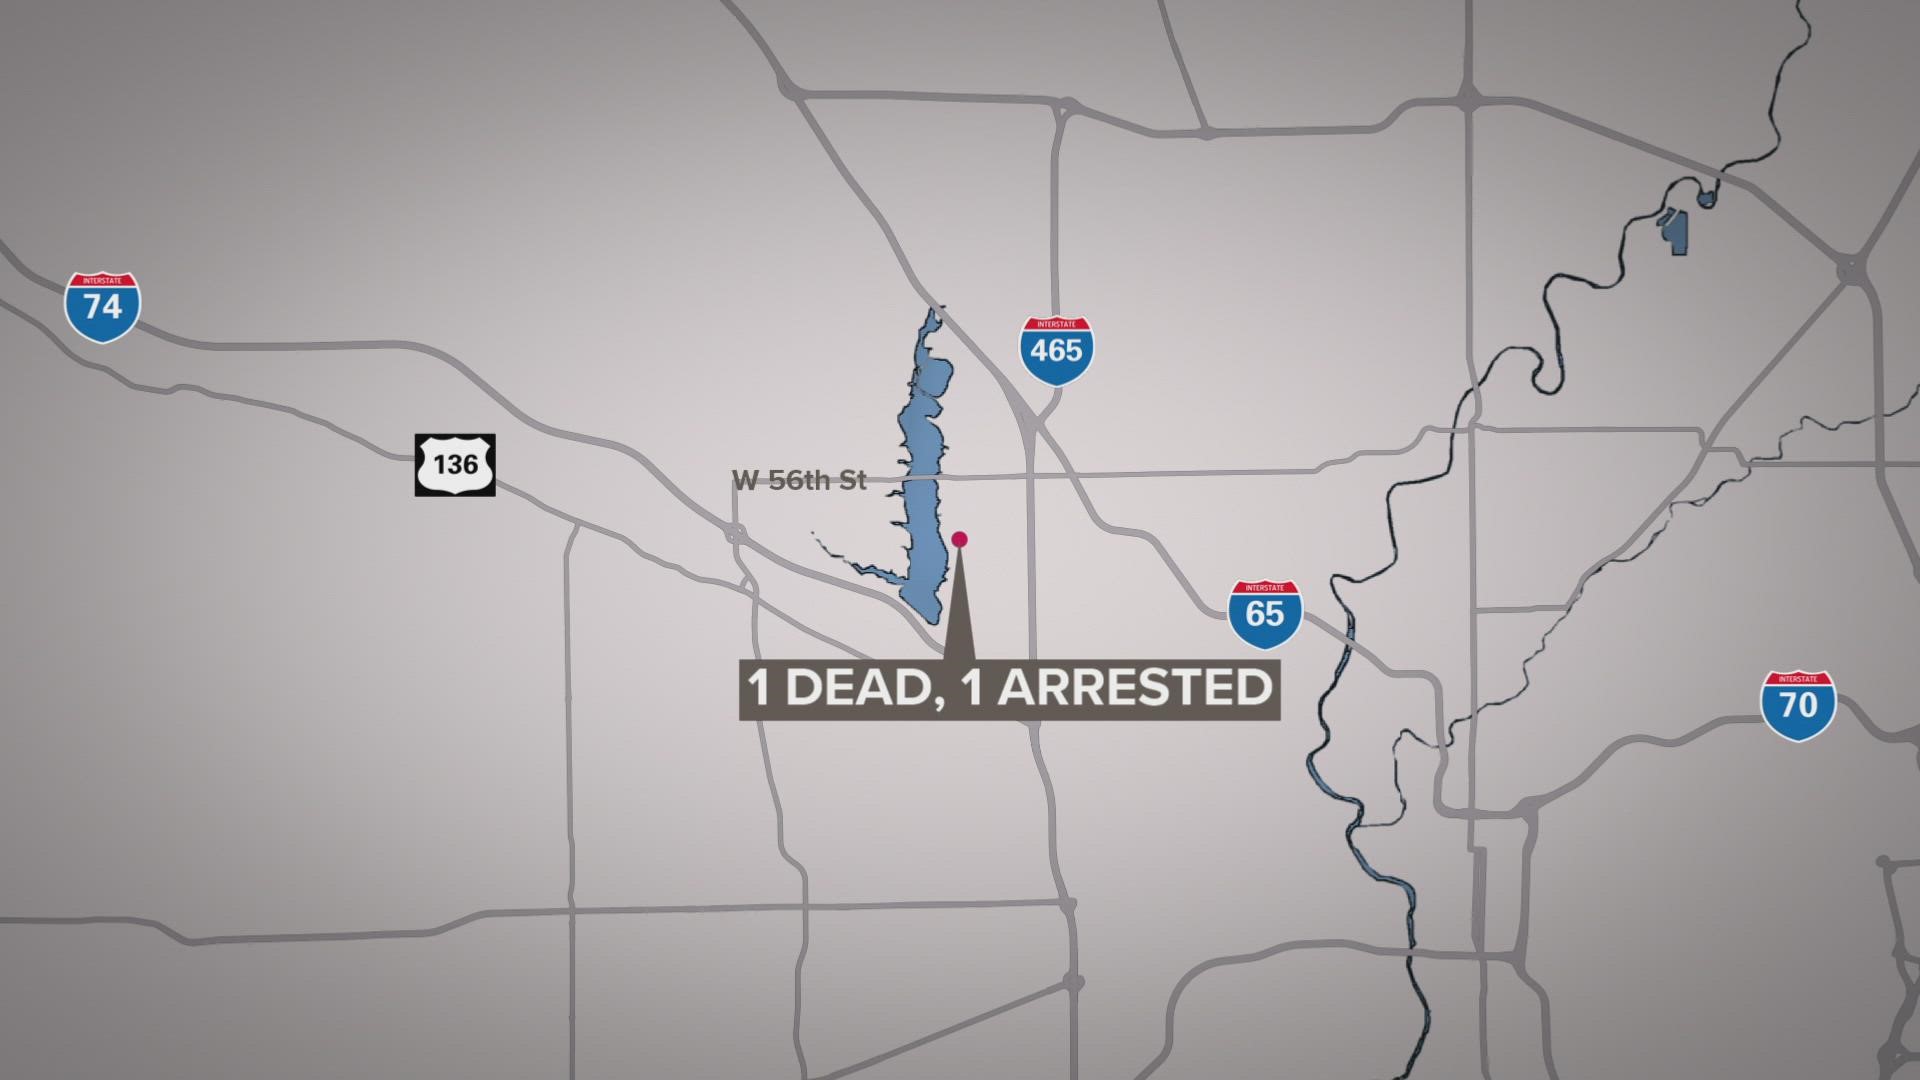 A man was arrested for murder early Sunday morning following a family disturbance at a home near Eagle Creek Reservoir on the west side of Indianapolis.